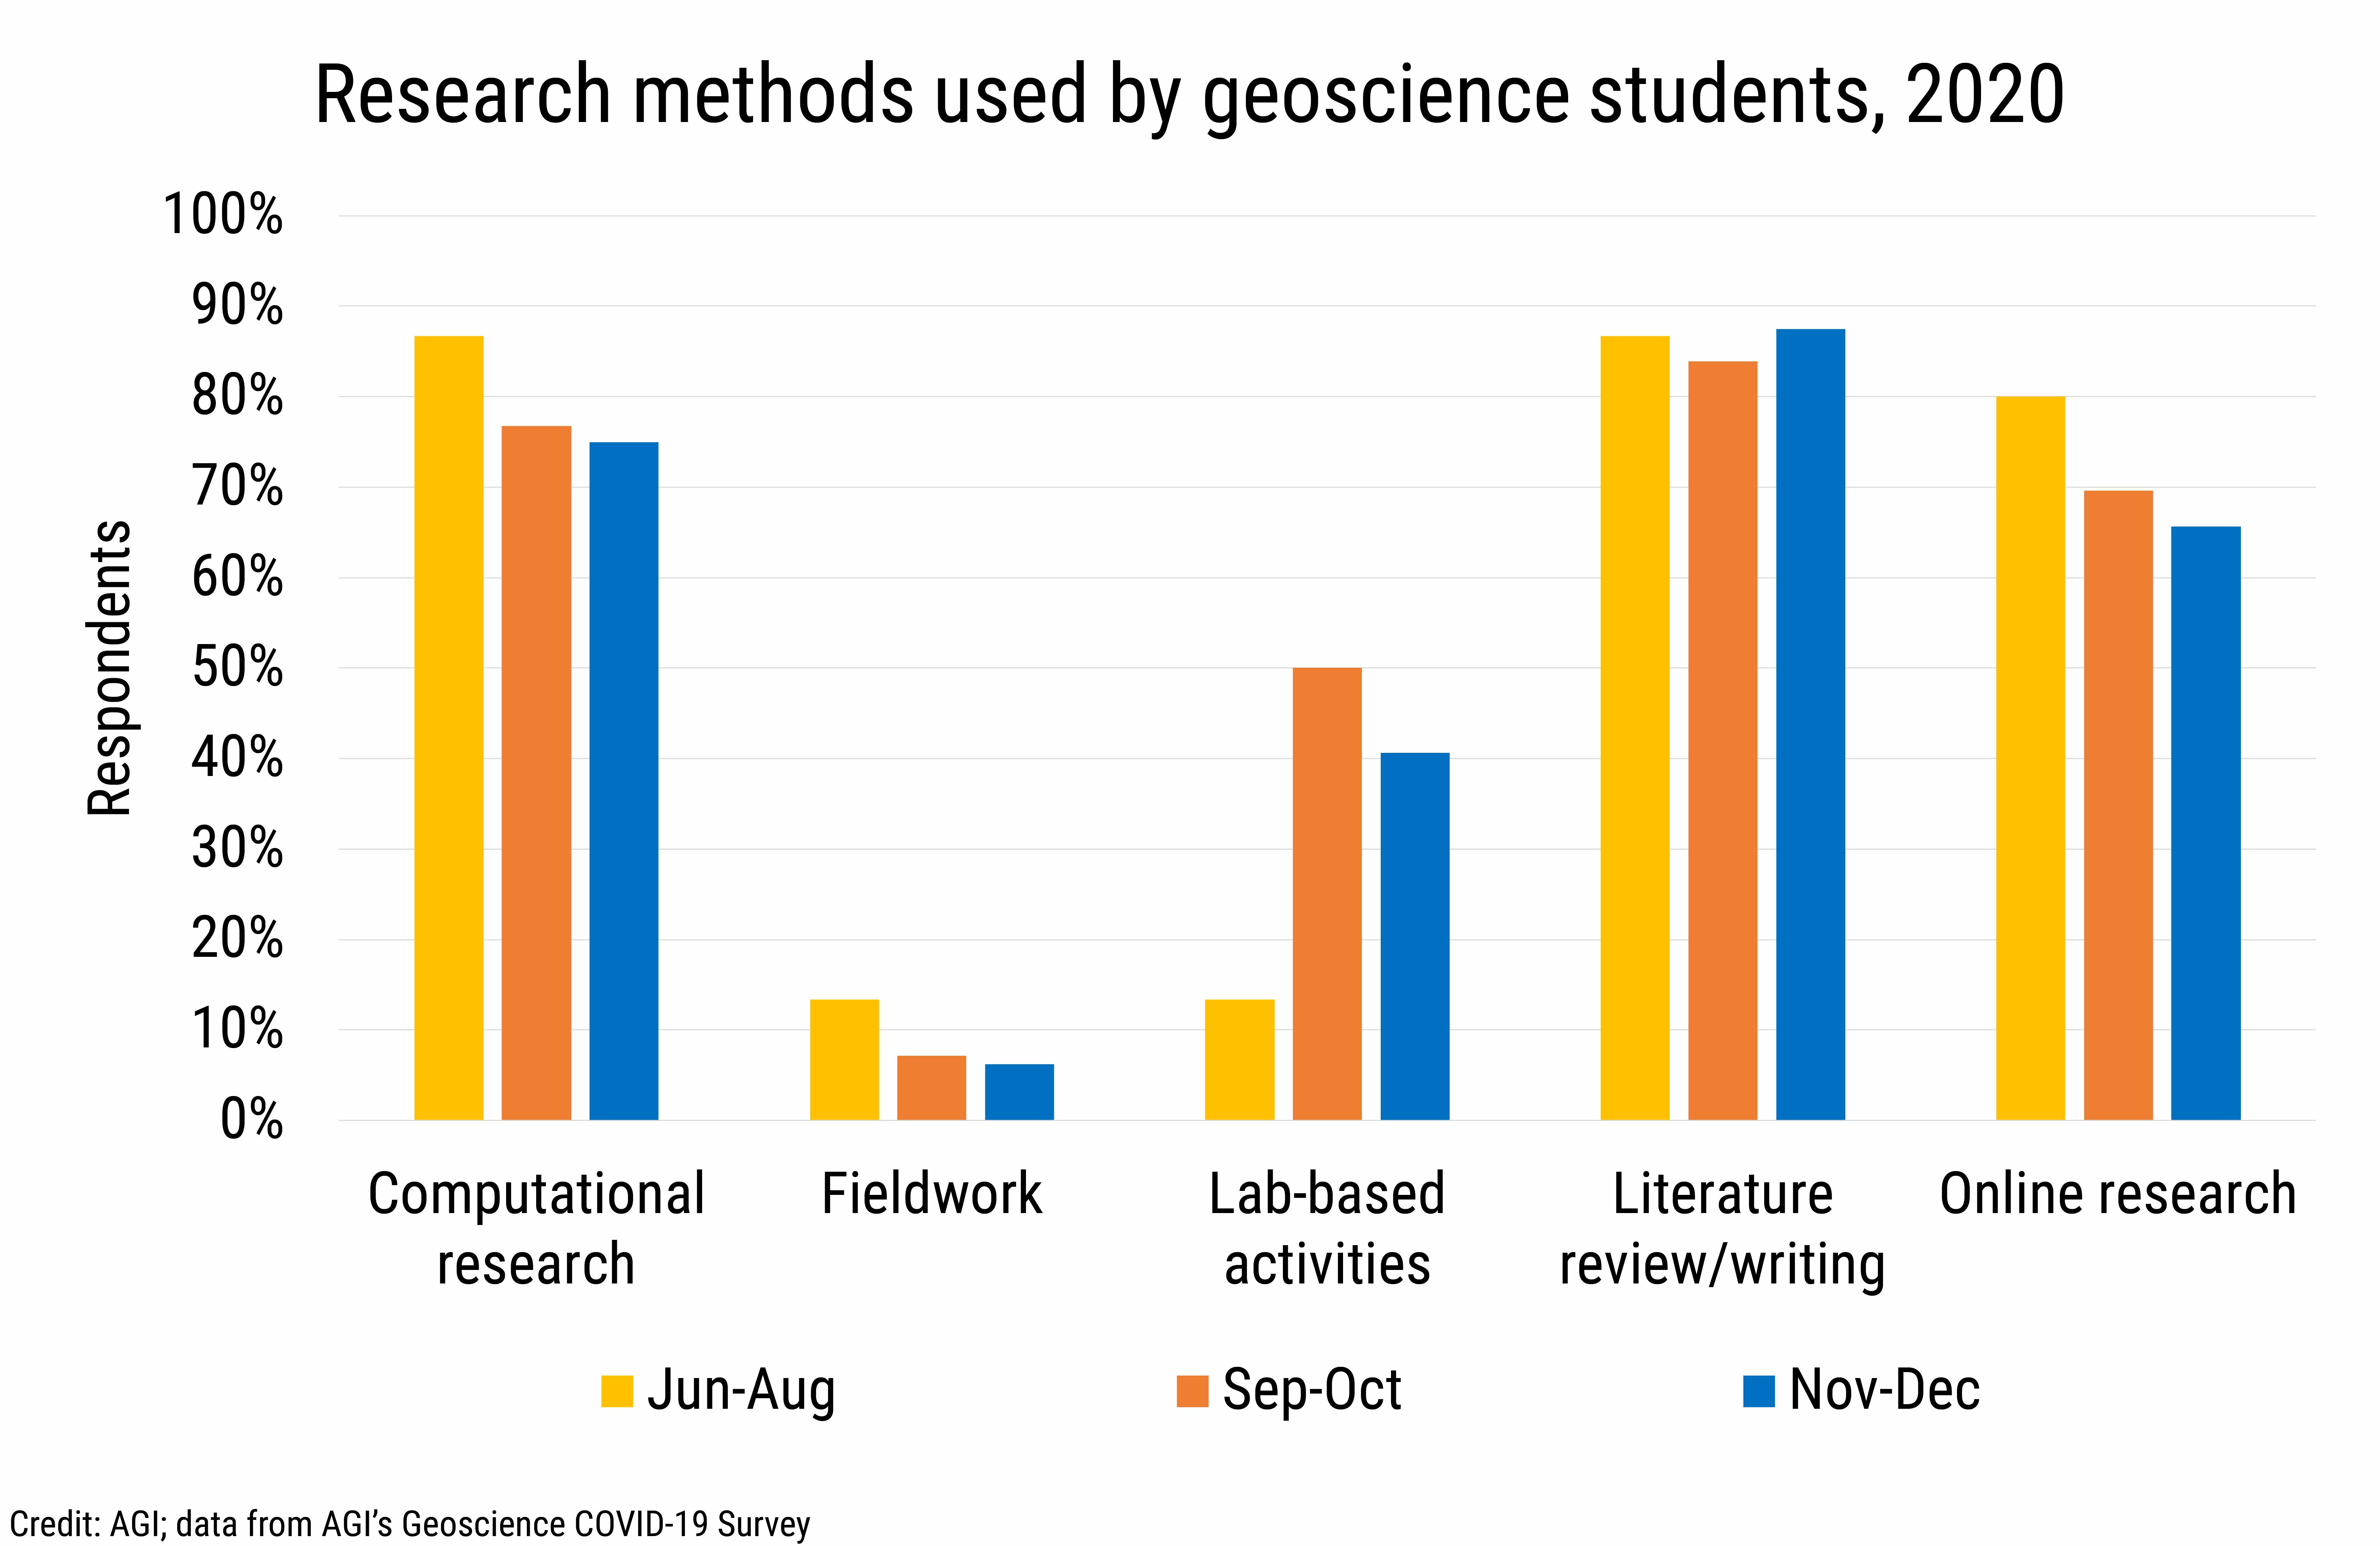 DB_2021-002 chart 01: Research methods used by geoscience students, 2020 (Credit: AGI; data from AGI's Geoscience COVID-19 Survey)